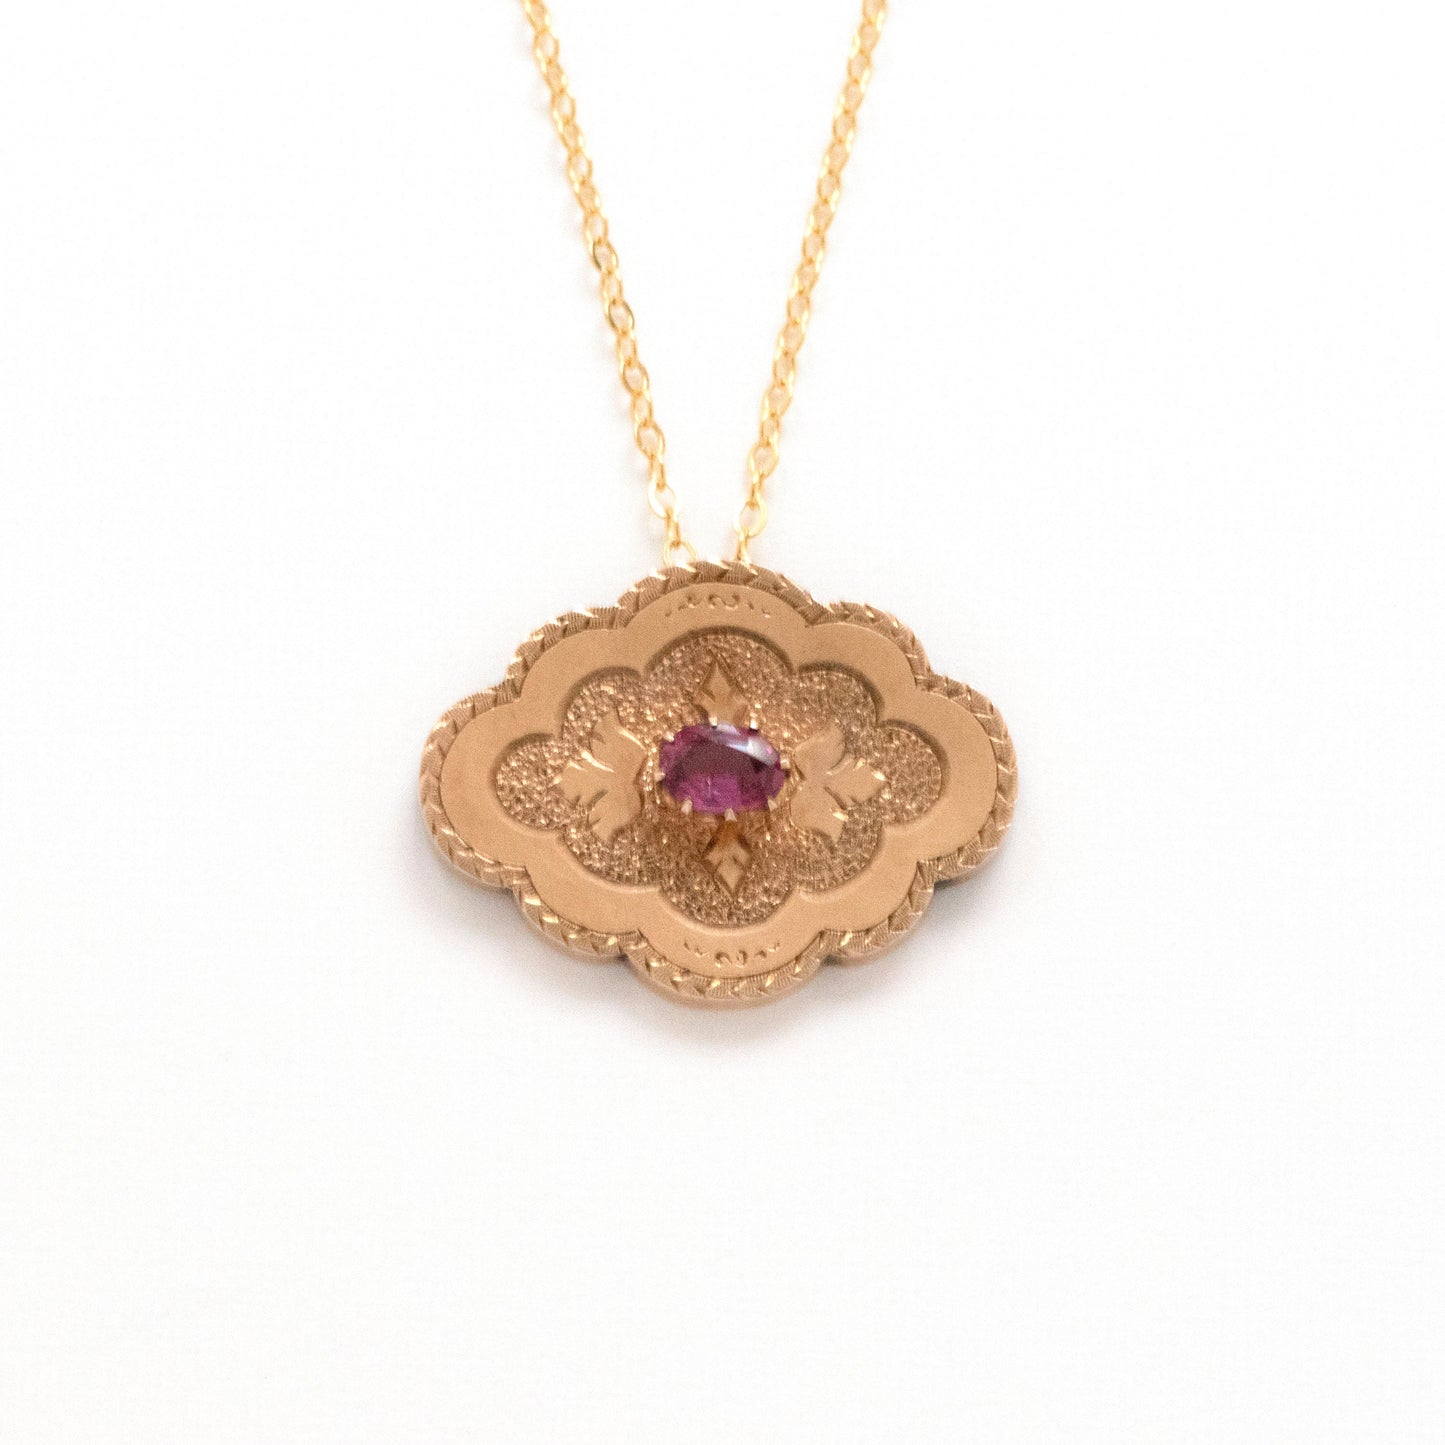 Antique 14k Gold Necklace with Purple Amethyst